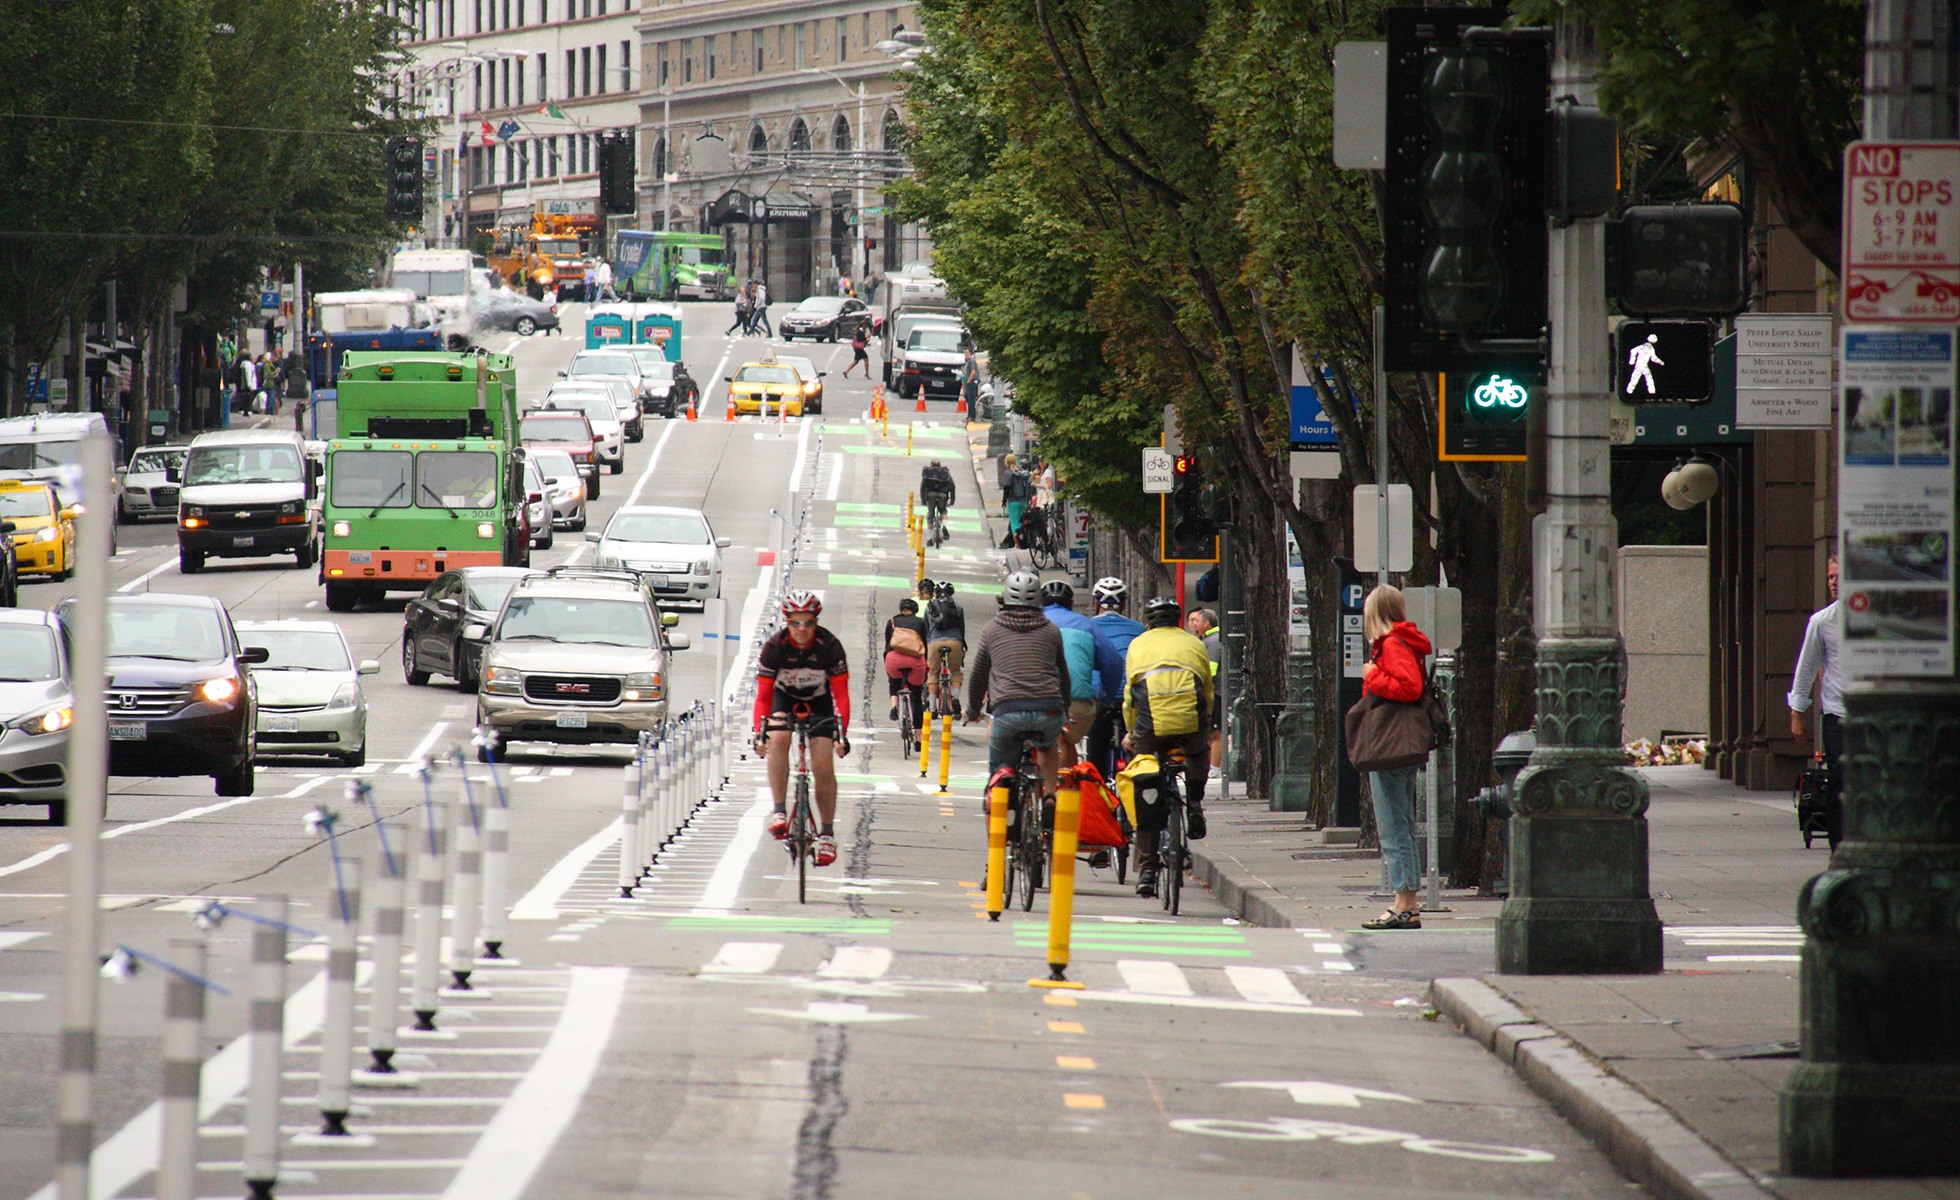 Cyclists use the protected bike lane on Second Avenue in Seattle, Washington.